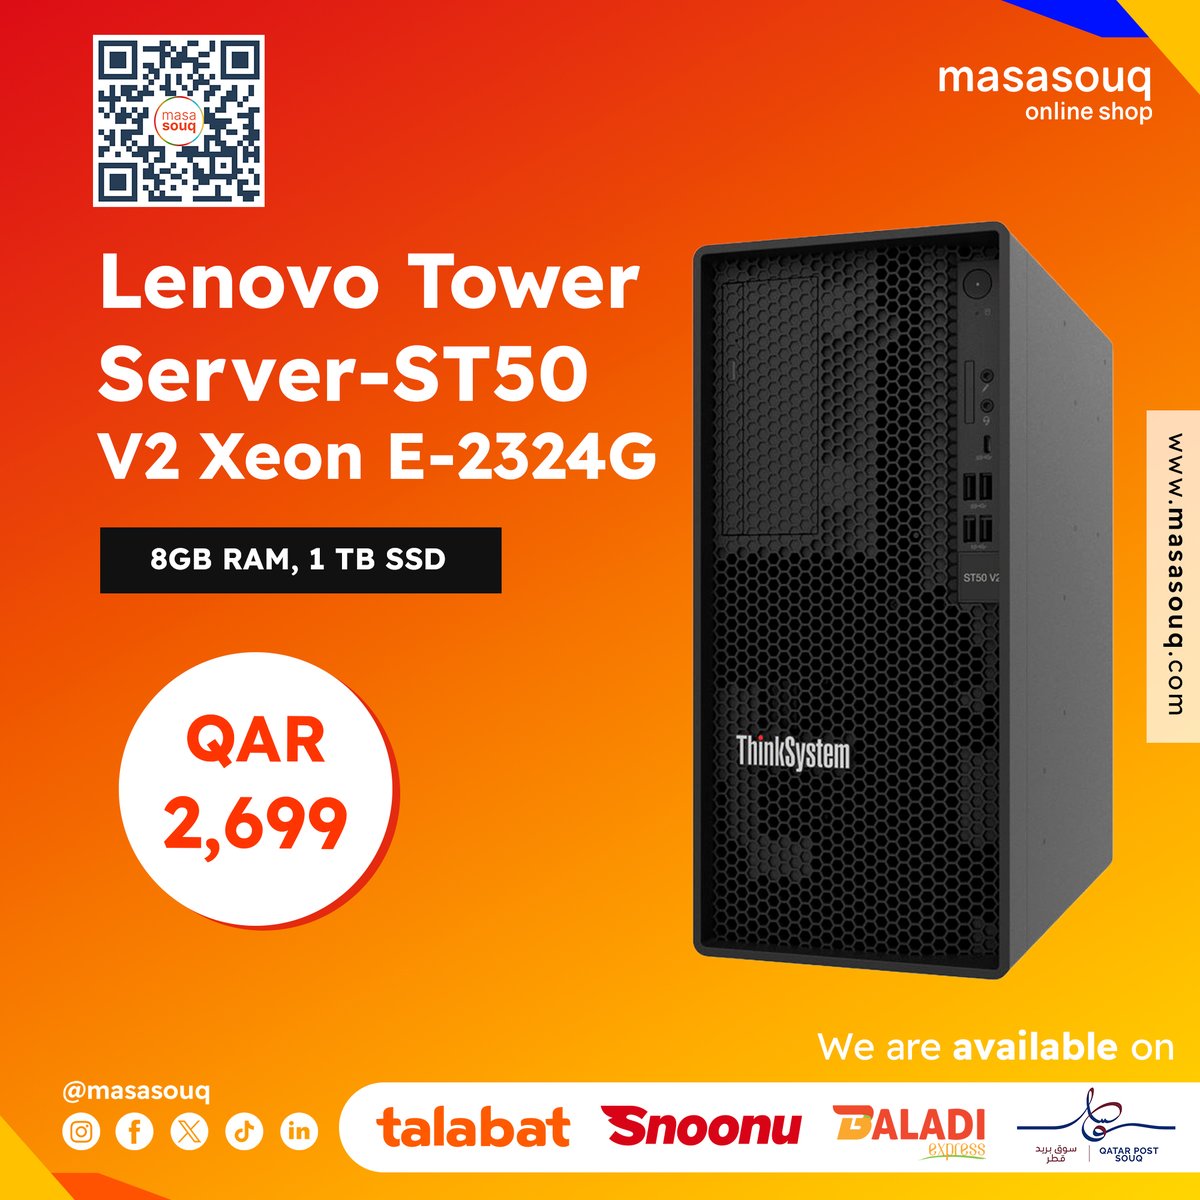 Unleash your business potential with the Lenovo Tower Server-ST50 V2! 💪  Packed with a Xeon processor, ample RAM, and speedy SSD storage.  Ideal for small businesses. QAR2,699  👉 masasouq.com/lenovo-tower-s…  #Lenovo #Server #SmallBusiness #Tech #Qatar #masasouq